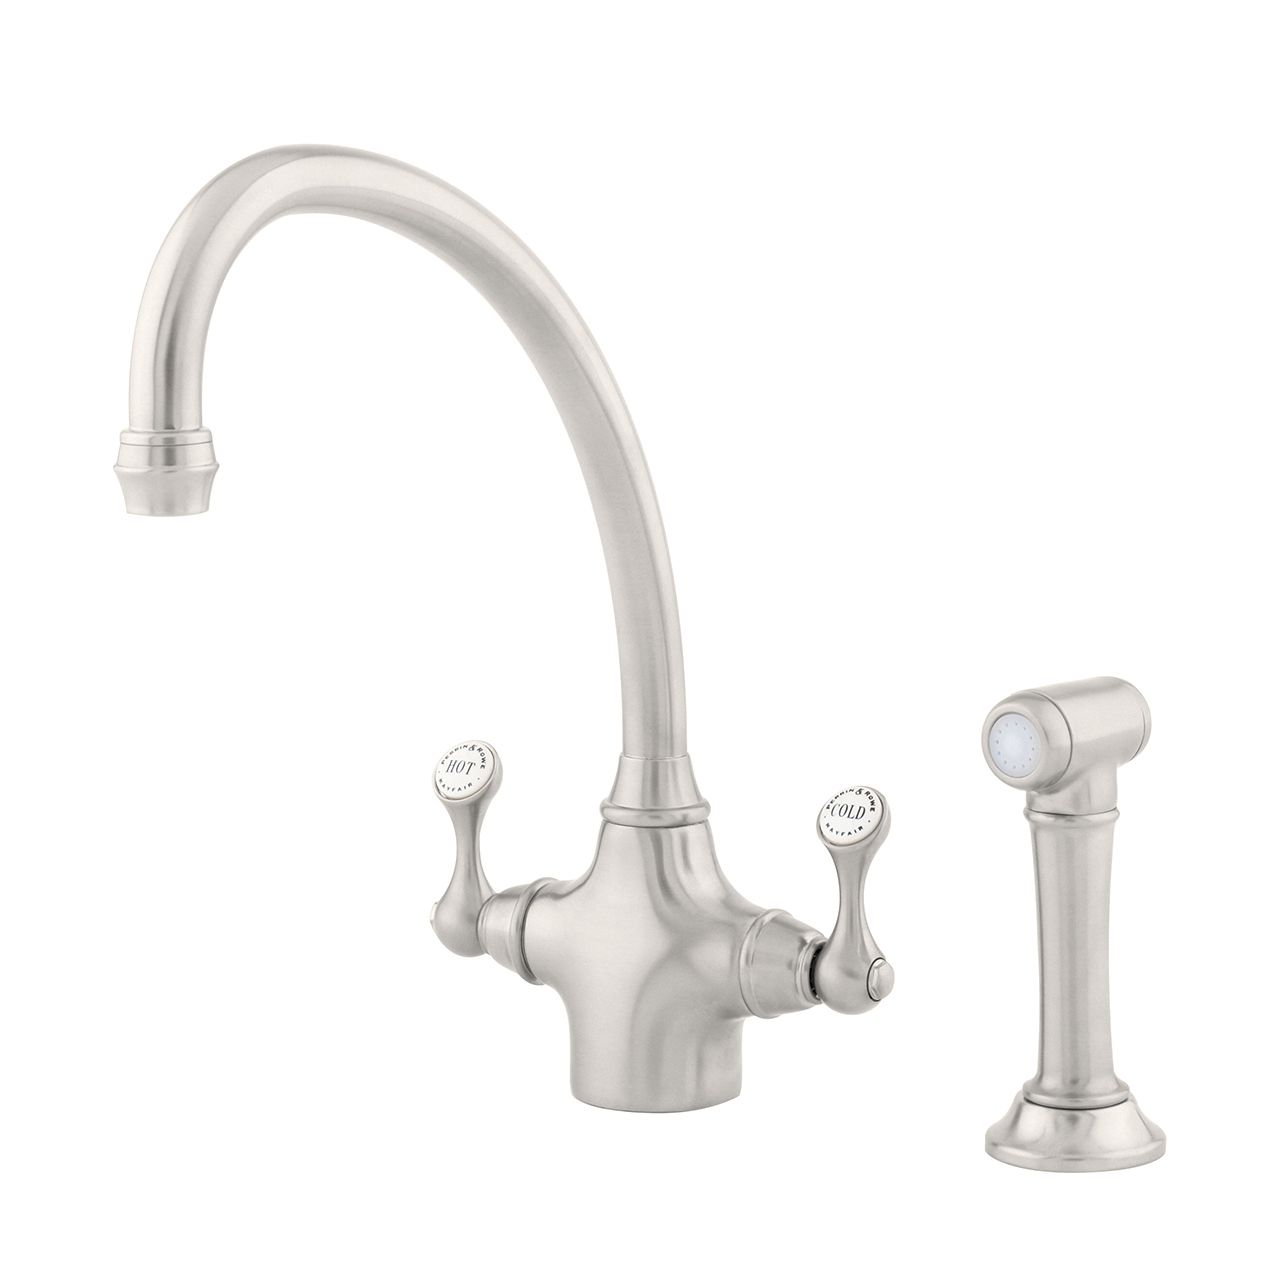 Etruscan Monobloc Sink Mixer with Levers and Rinse – Perrin & Rowe